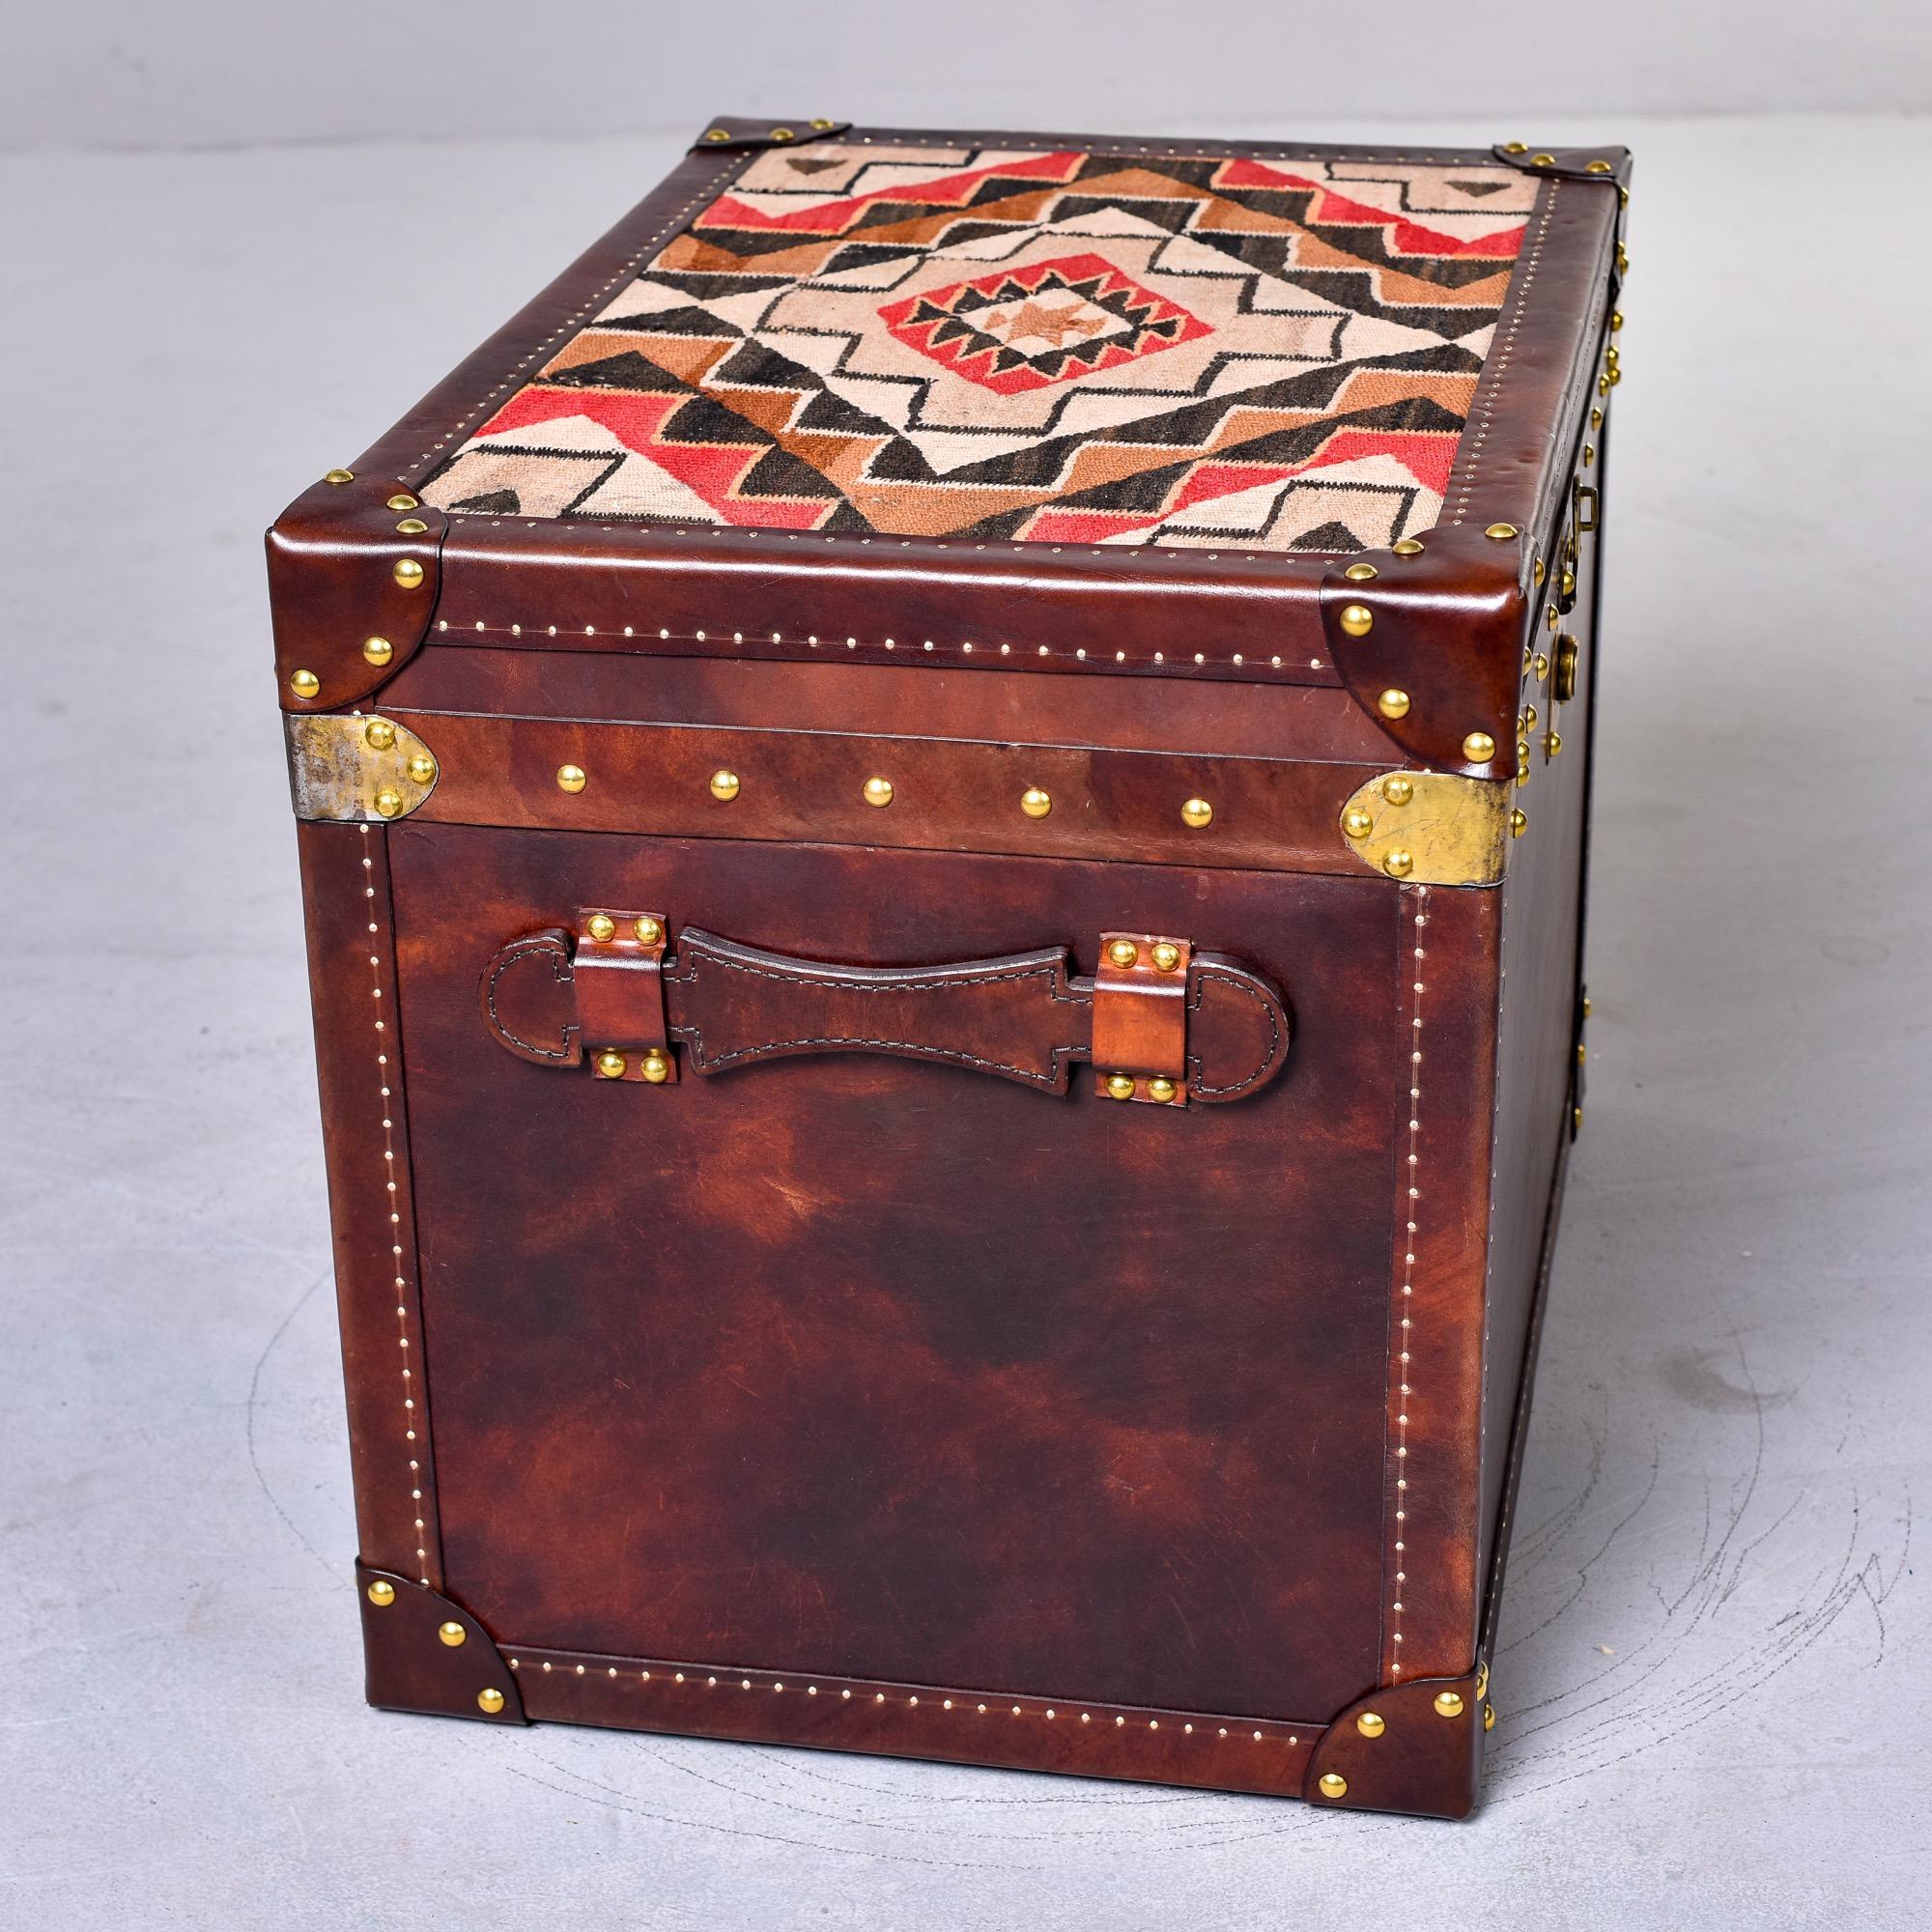 Bohemian Leather Covered Trunk with Vintage Hardware and Kilim on Top Panel For Sale